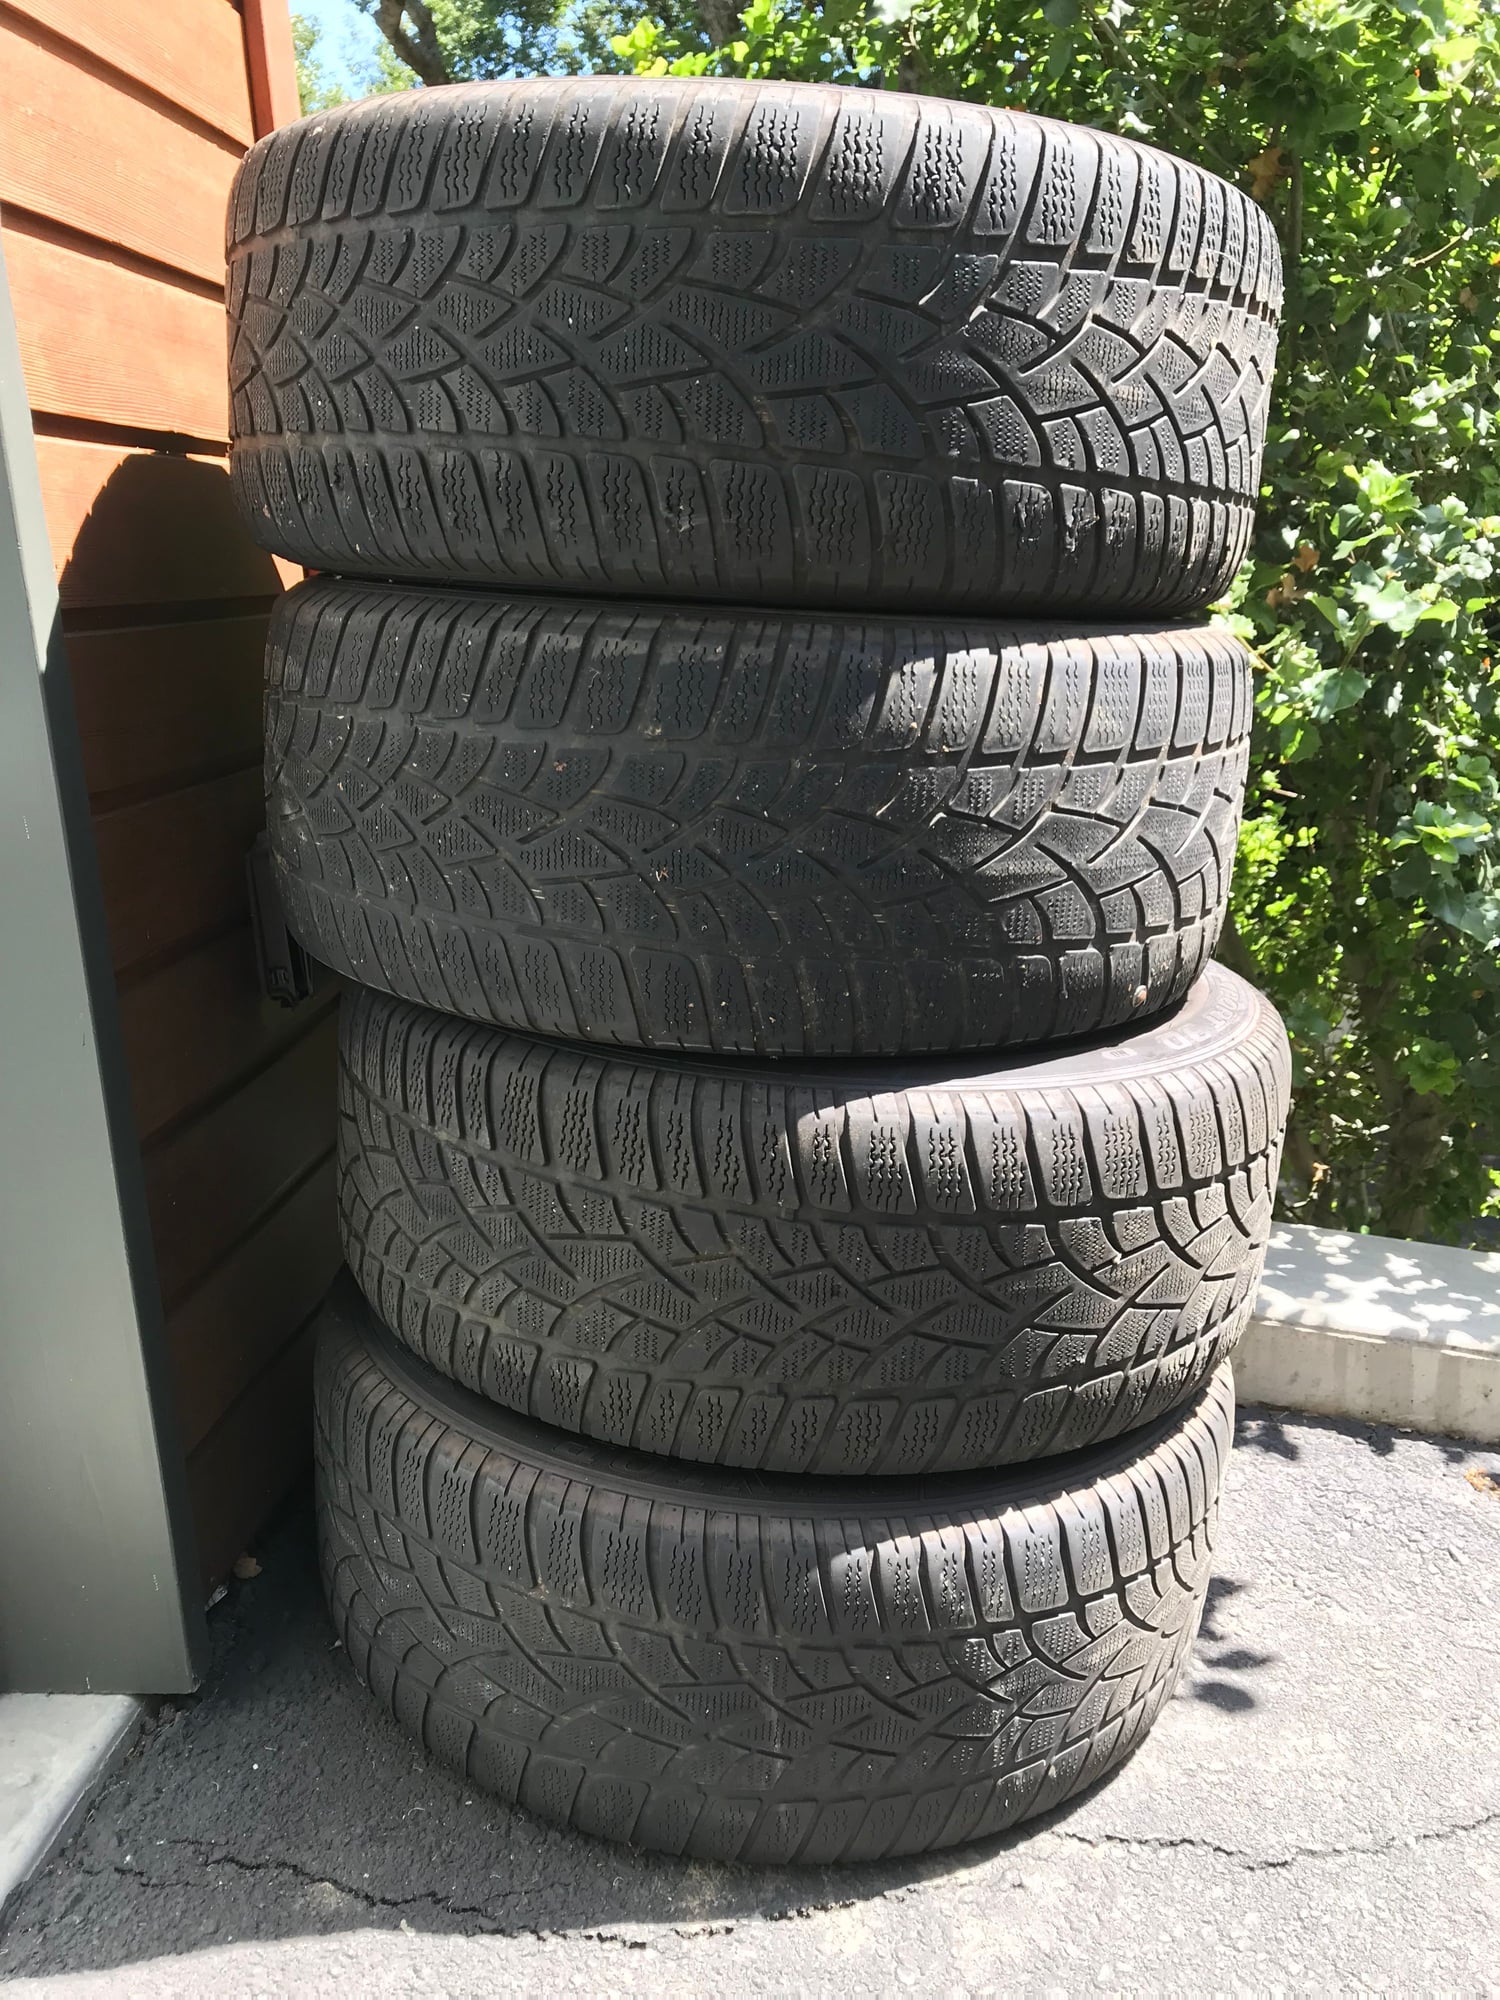 Wheels and Tires/Axles - 20" Porsche Wheels w/ TPMS from 2012 Cayenne - Steal them for $400 - Used - 2011 to 2019 Porsche Cayenne - Sausalito, CA 94965, United States